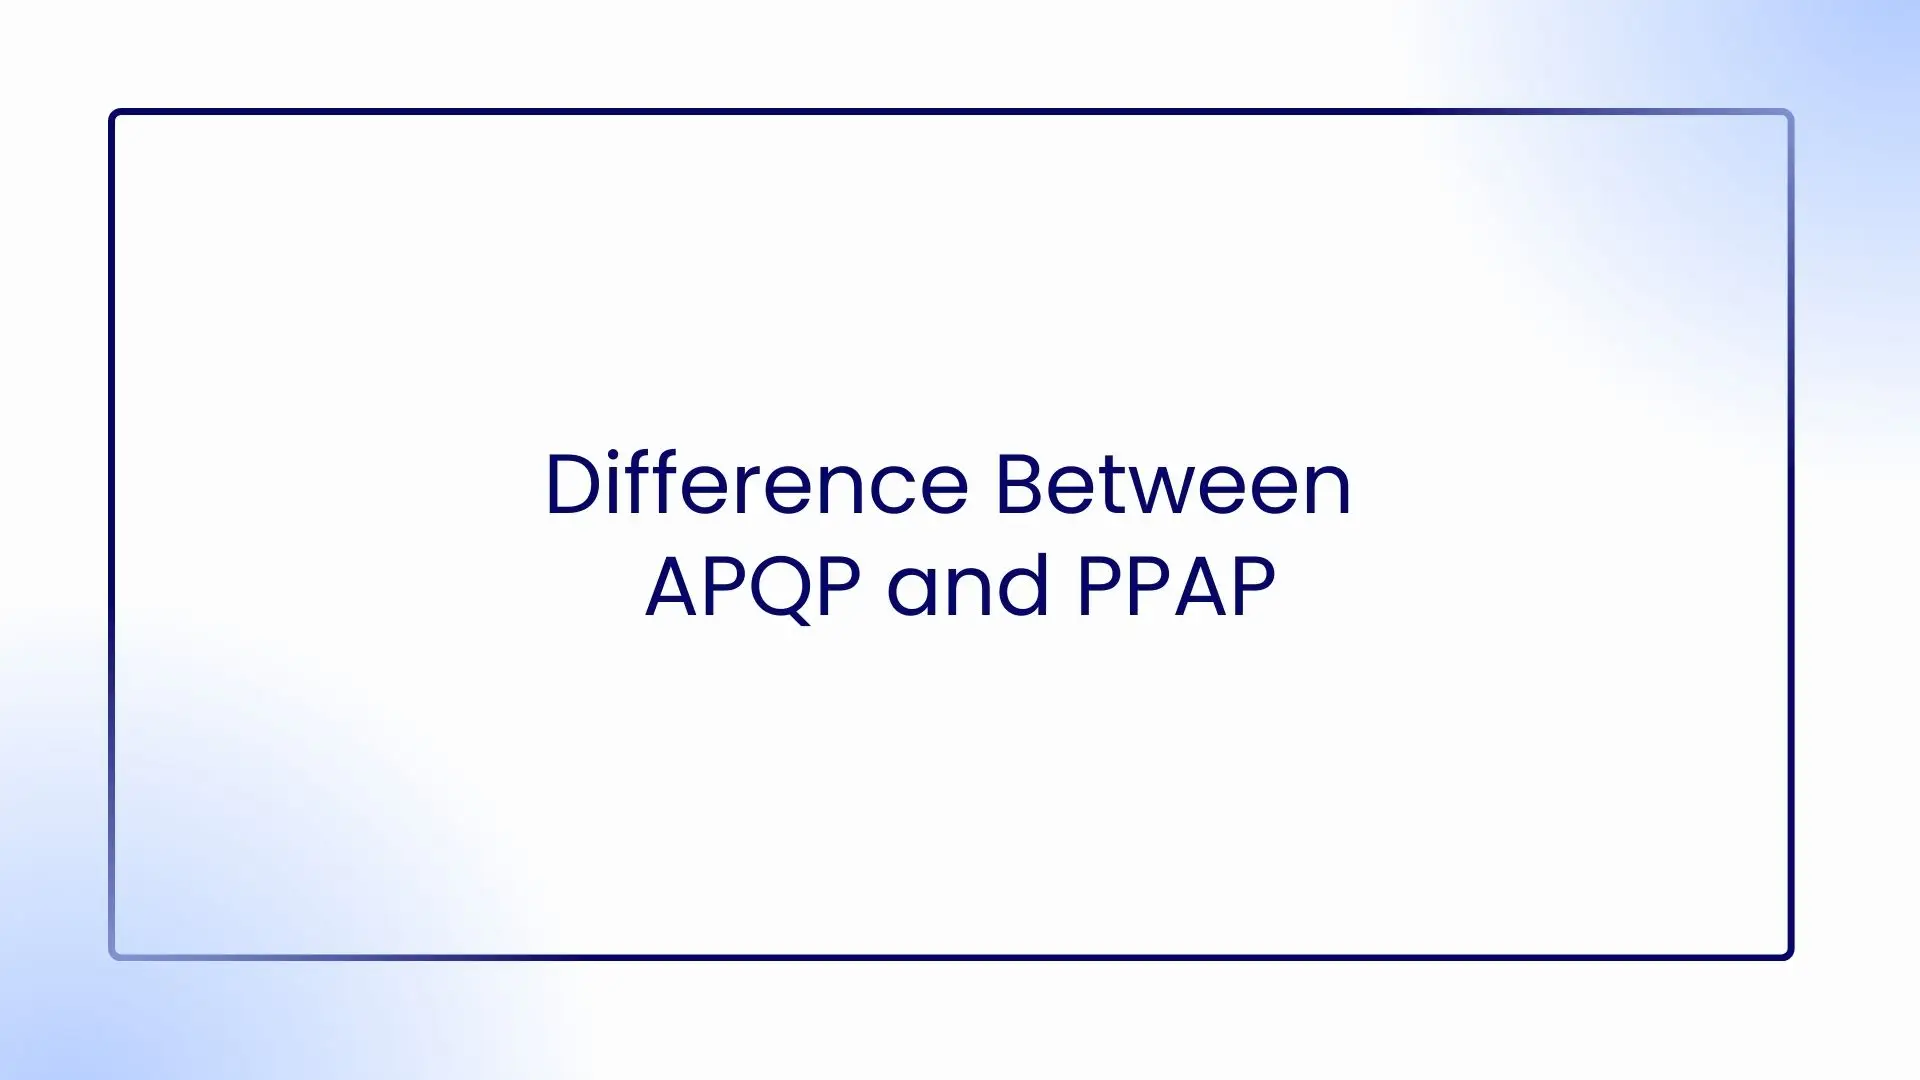 Difference Between APQP and PPAP